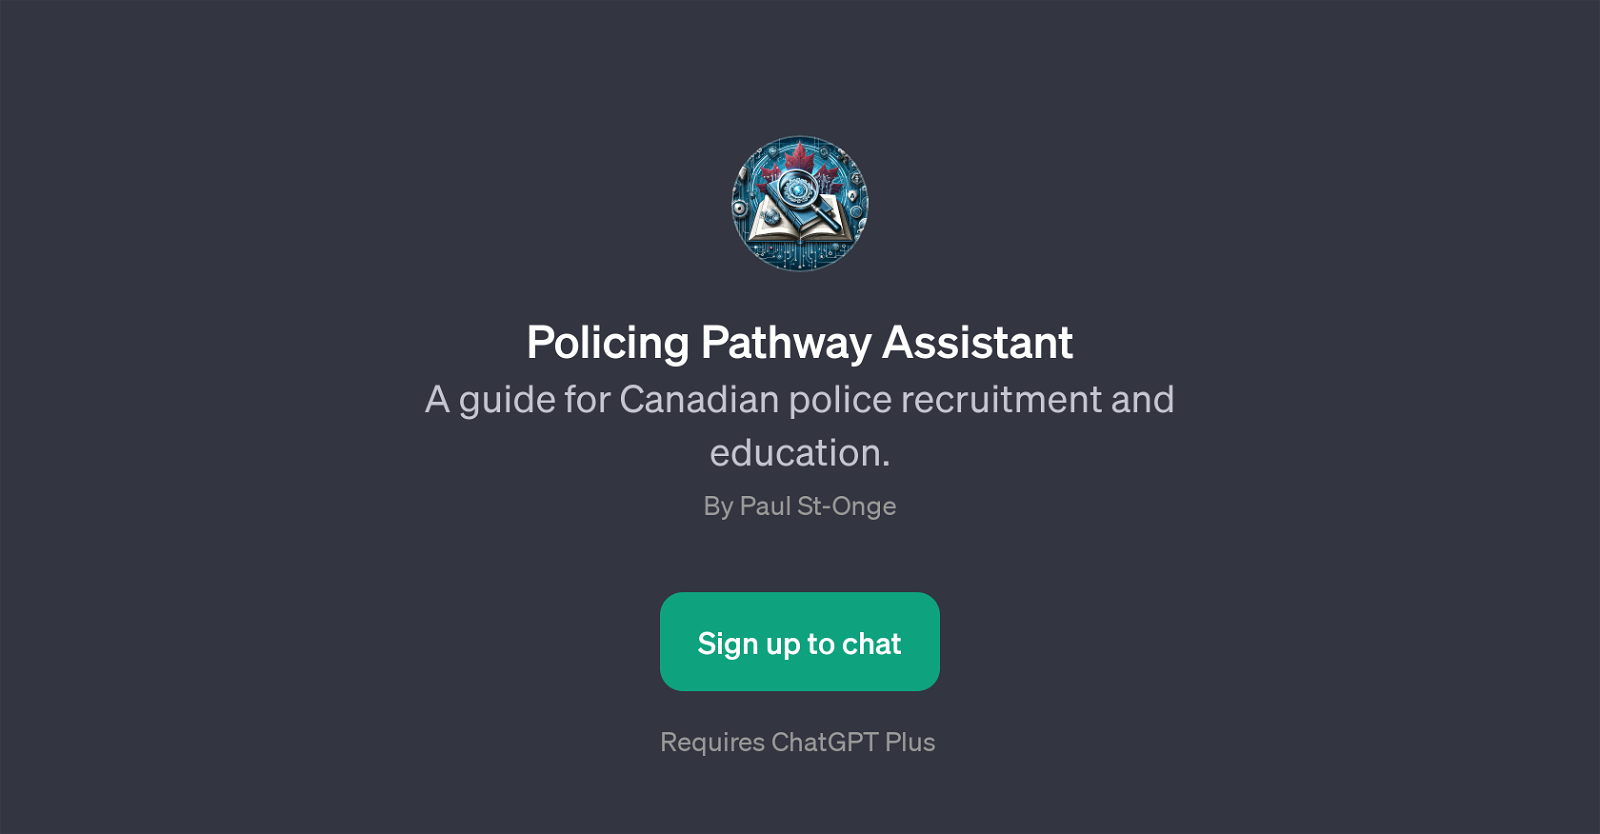 Policing Pathway Assistant website